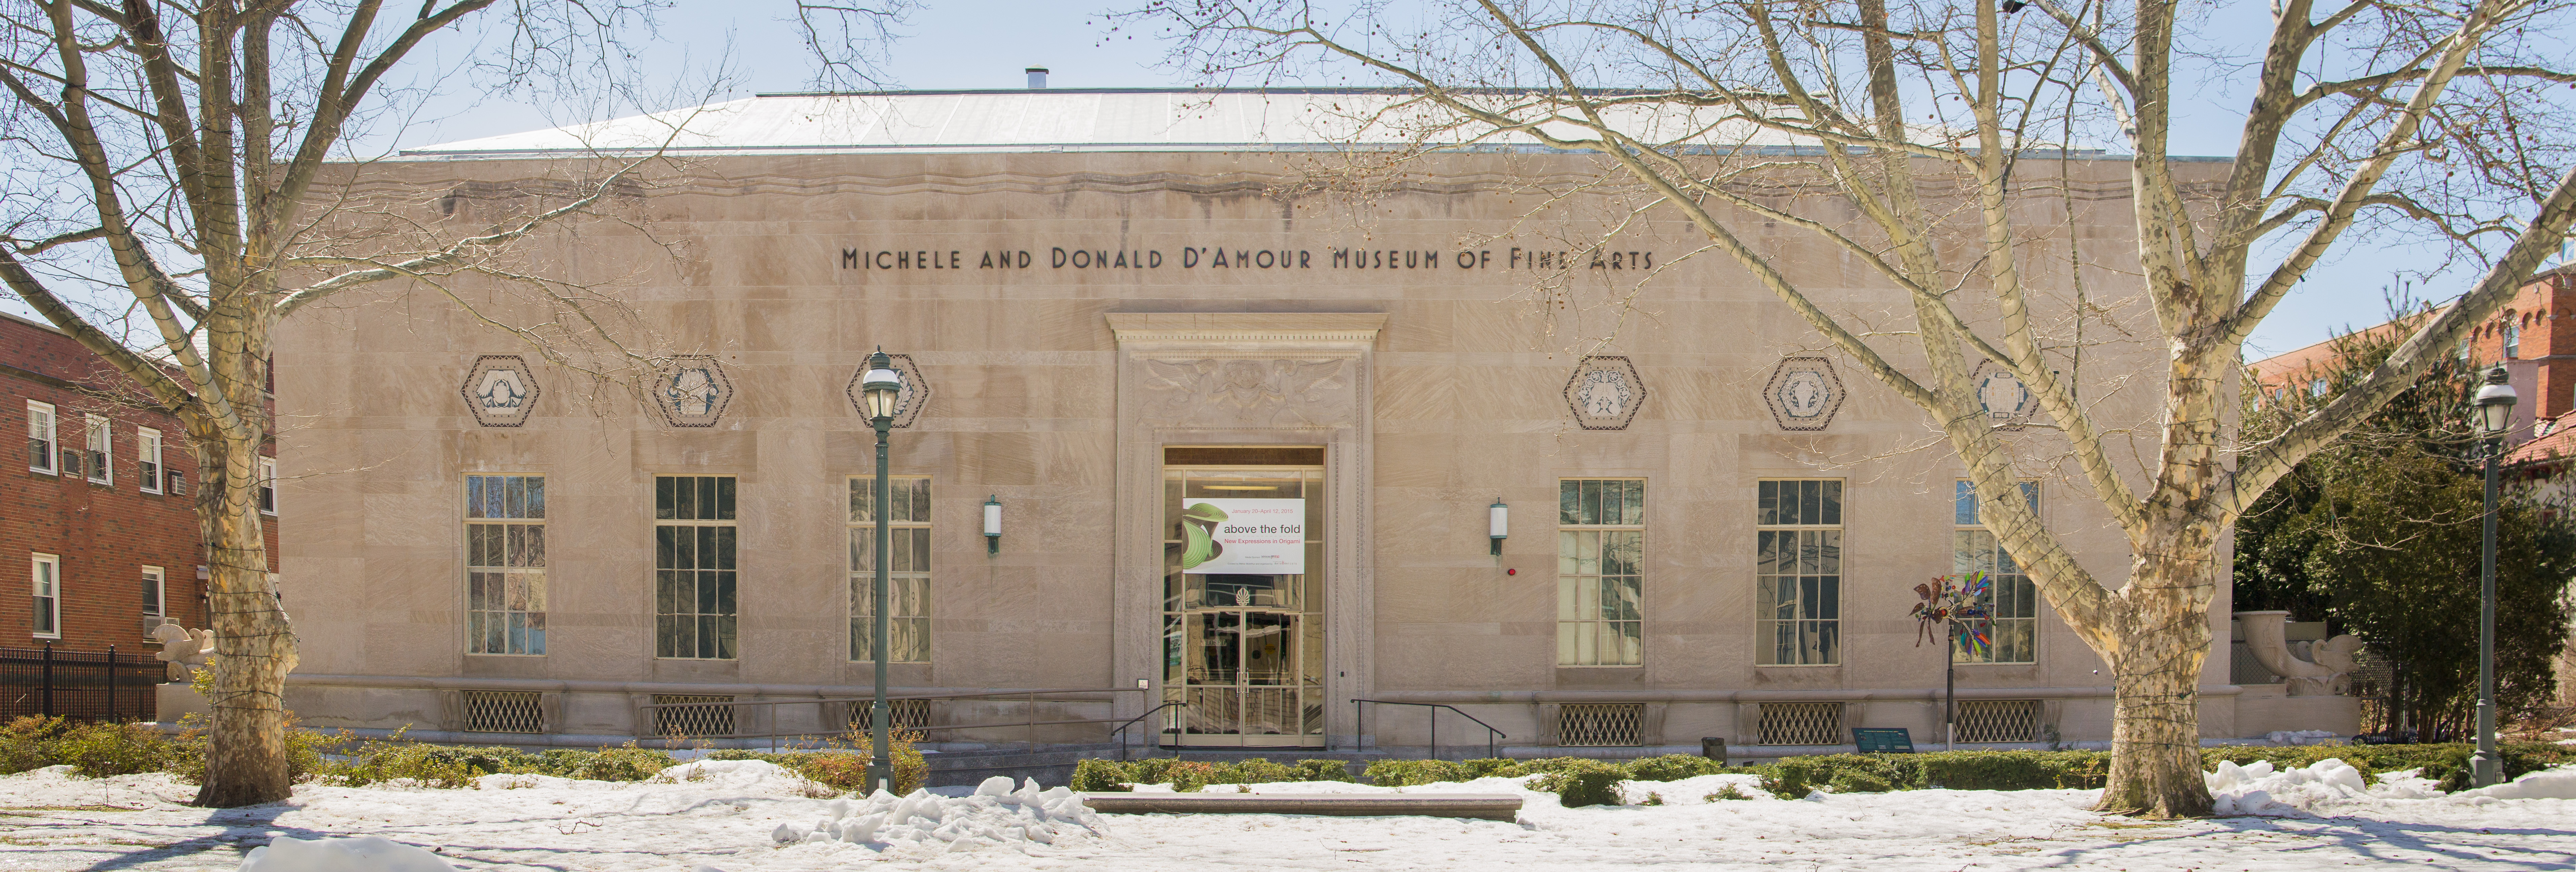 Michele and Donald D'Amour Museum of Fine Arts in winter.